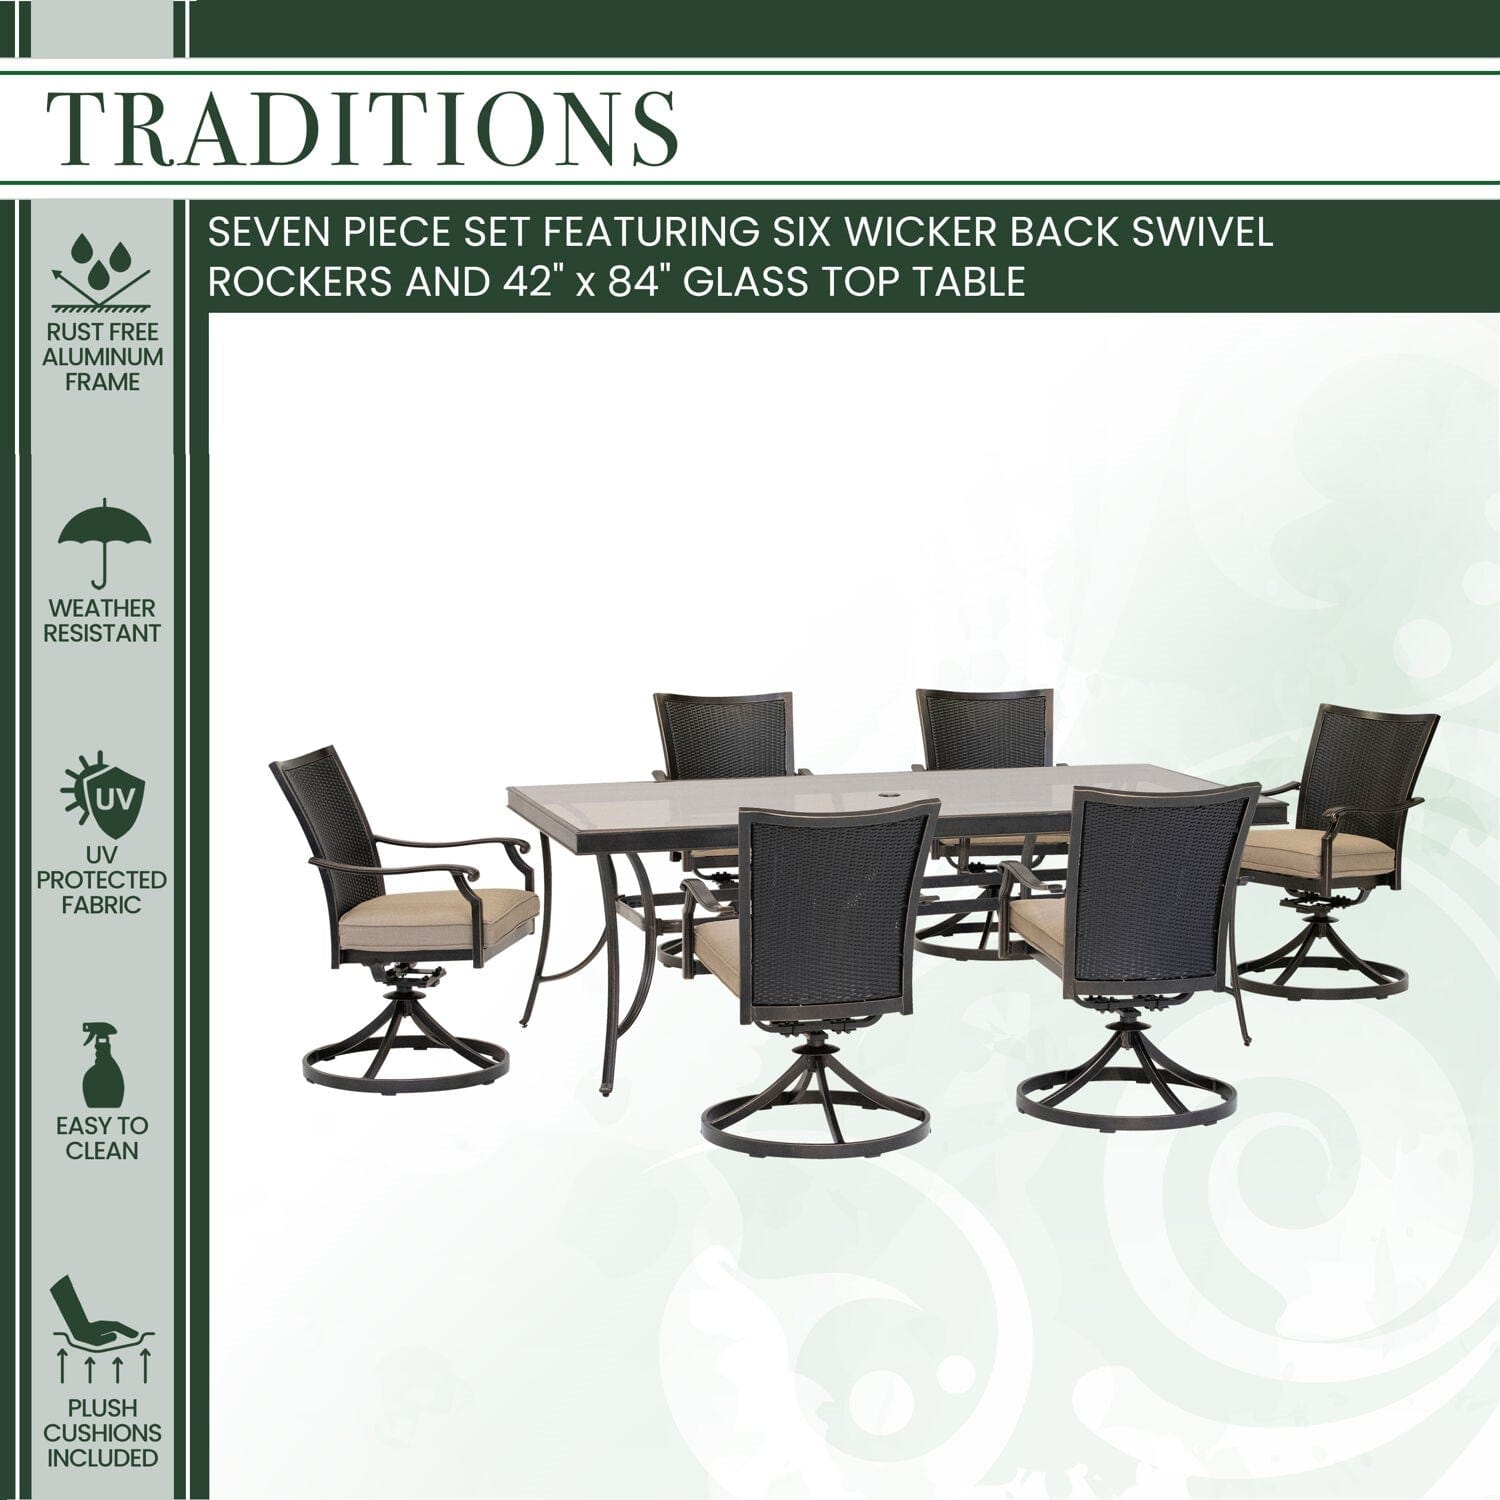 Hanover Outdoor Dining Set Hanover - Traditions 7-Piece Dining Set in Tan with 6 Wicker Back Swivel Rockers and Extra Large 42 in. x 84 in. Glass-Top Table - TRADDNWB7PCSWG-TAN